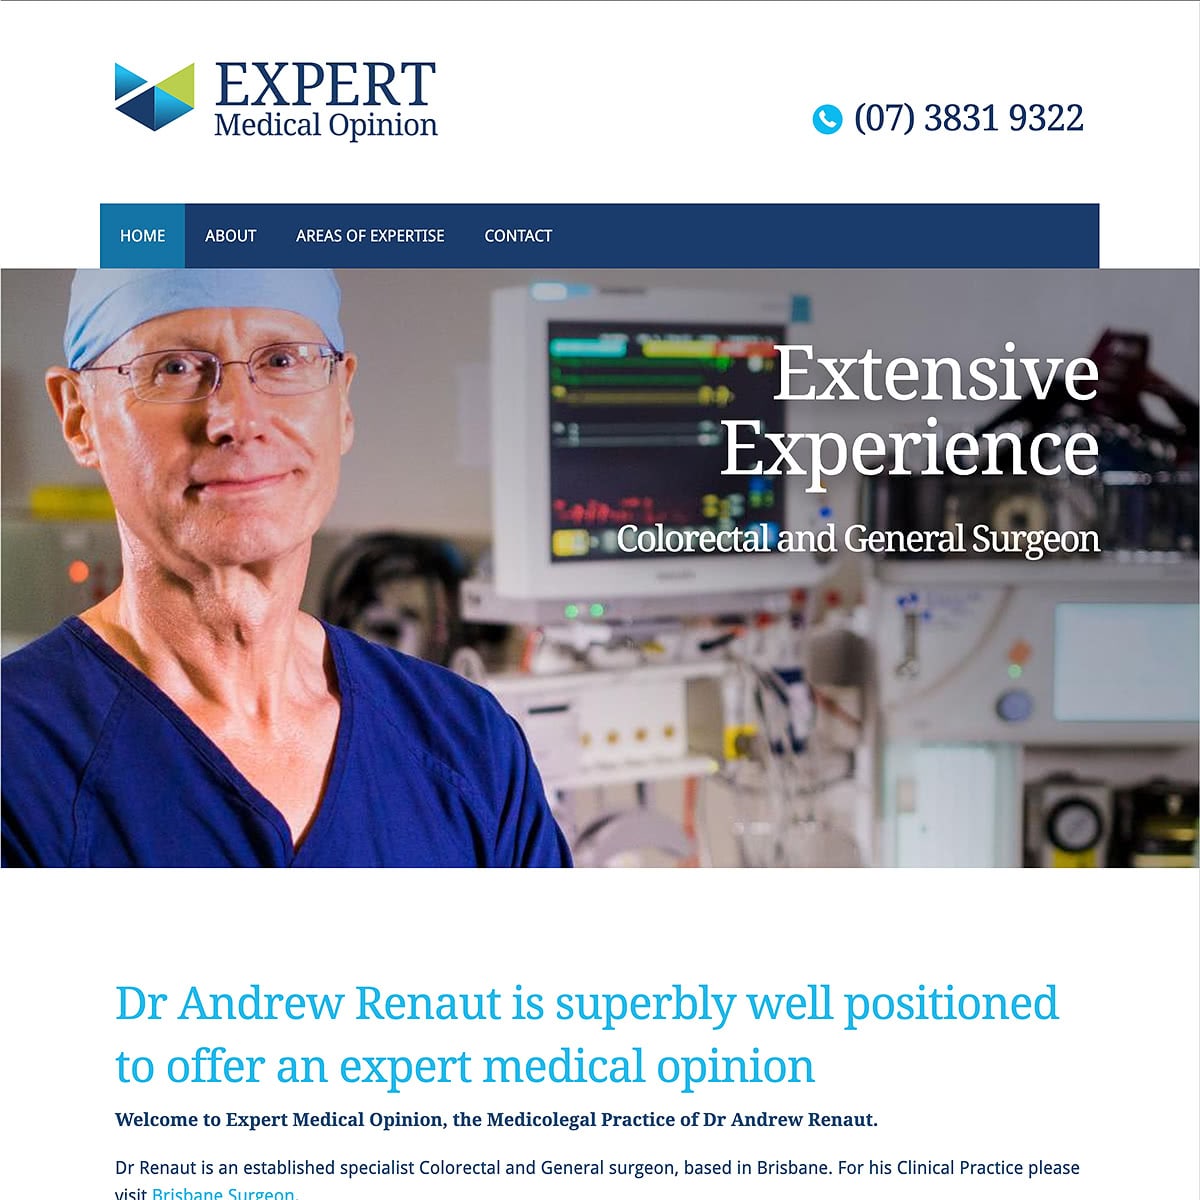 Expert Medical Opinion - Homepage Banner - Extensive Experience